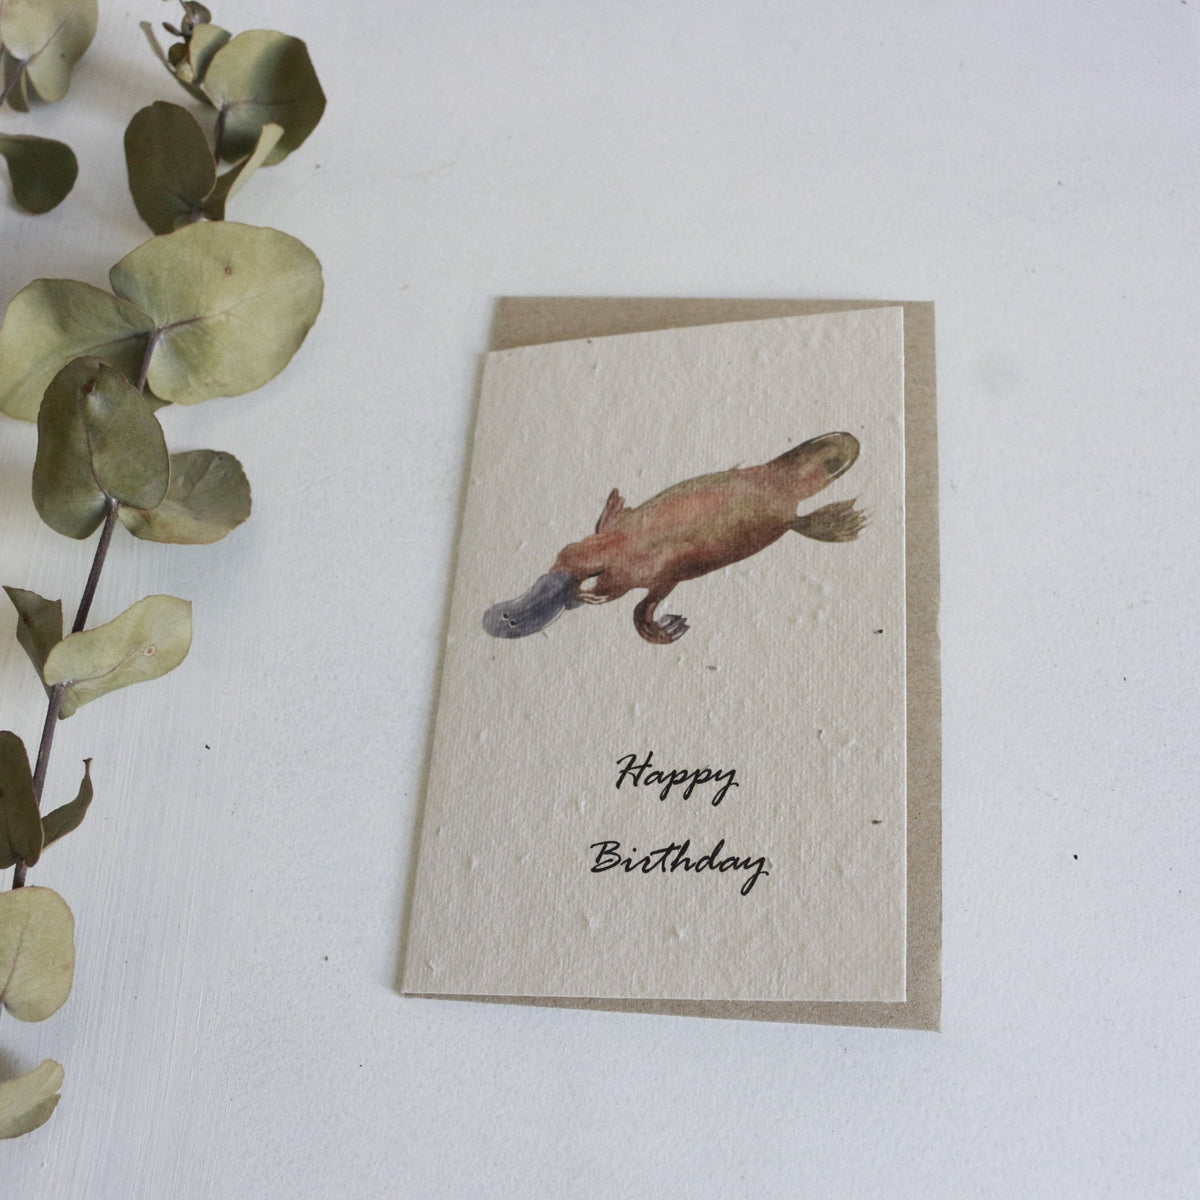 Planet Go RoundPlatypus Happy Birthday Seed Card #same day gift delivery melbourne#